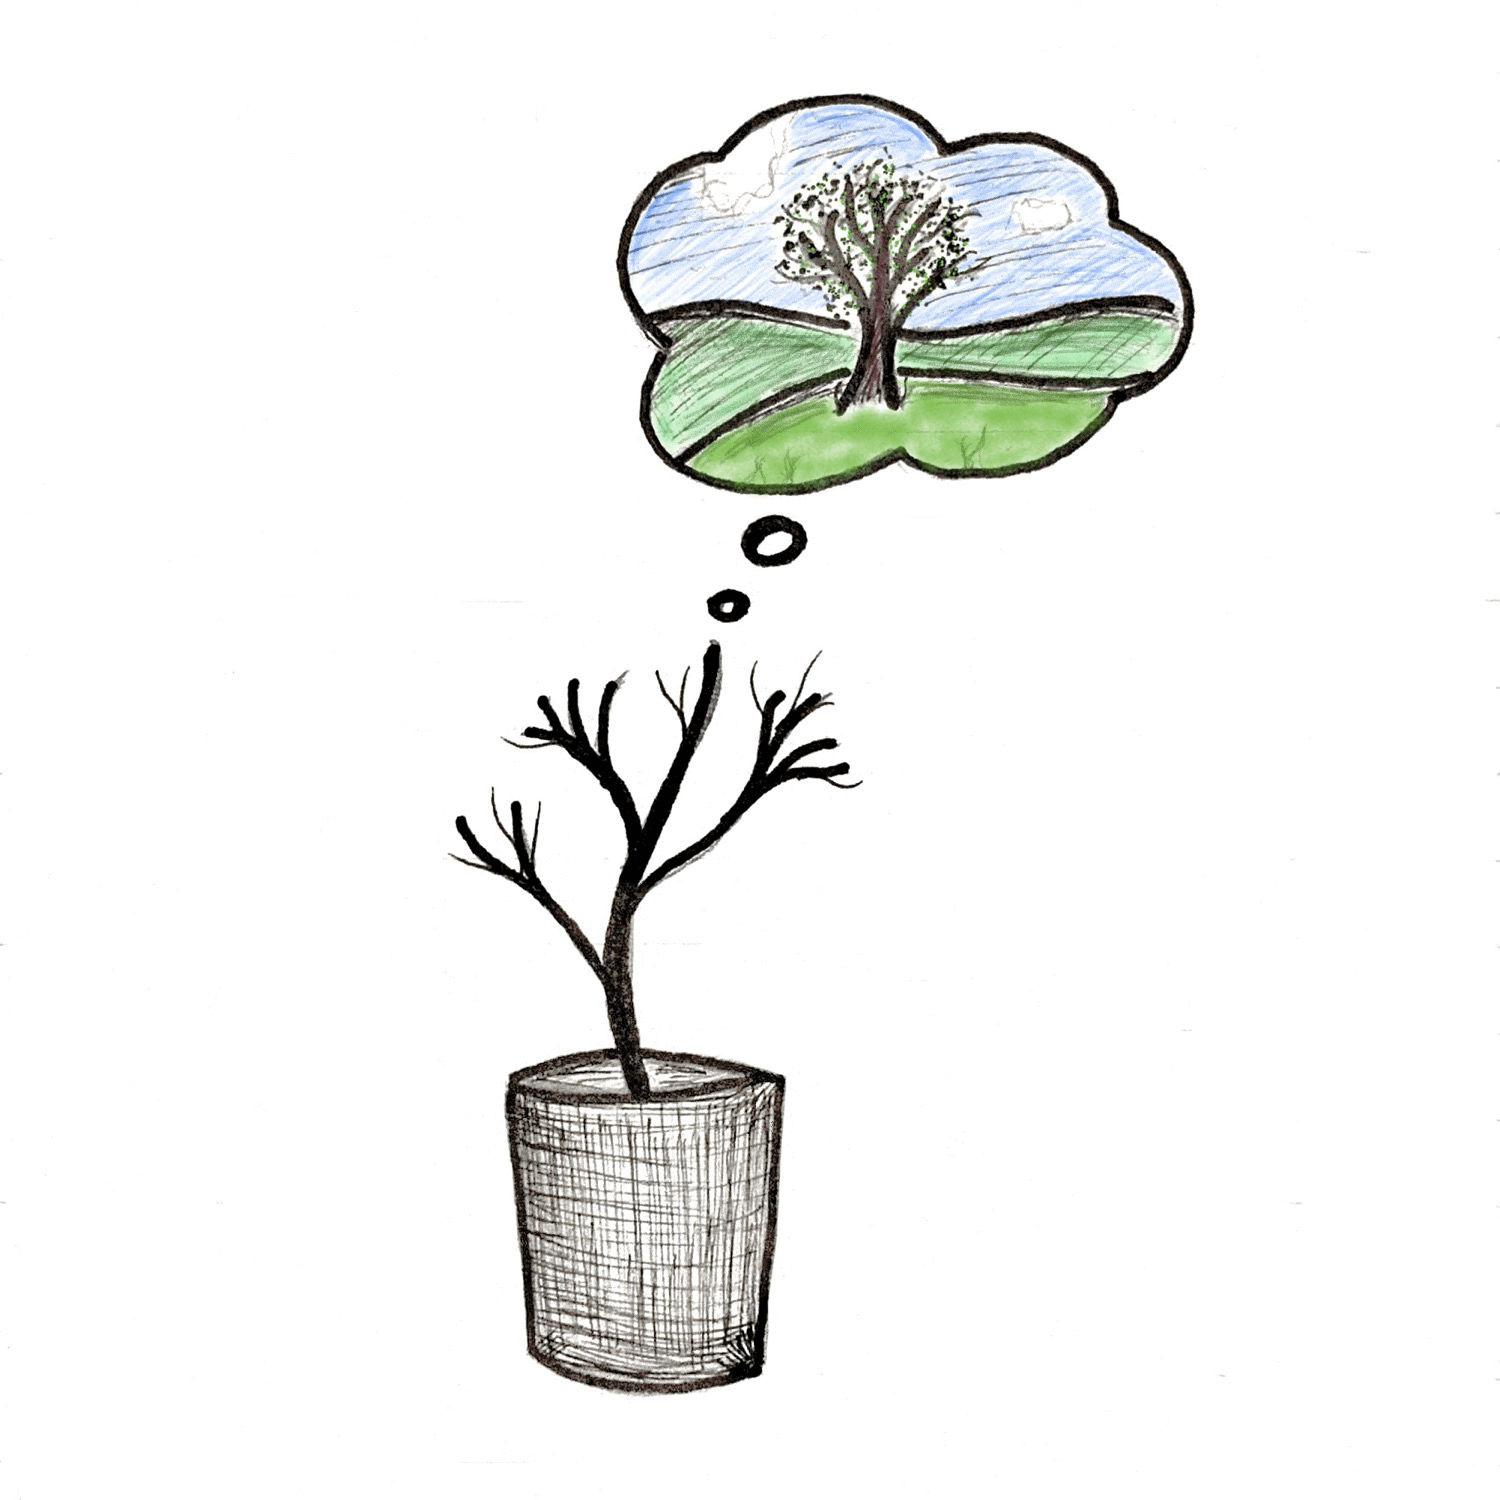 A drawing of a small pot plant with a dream bubble above it, the plant is dreaming about being a large tree